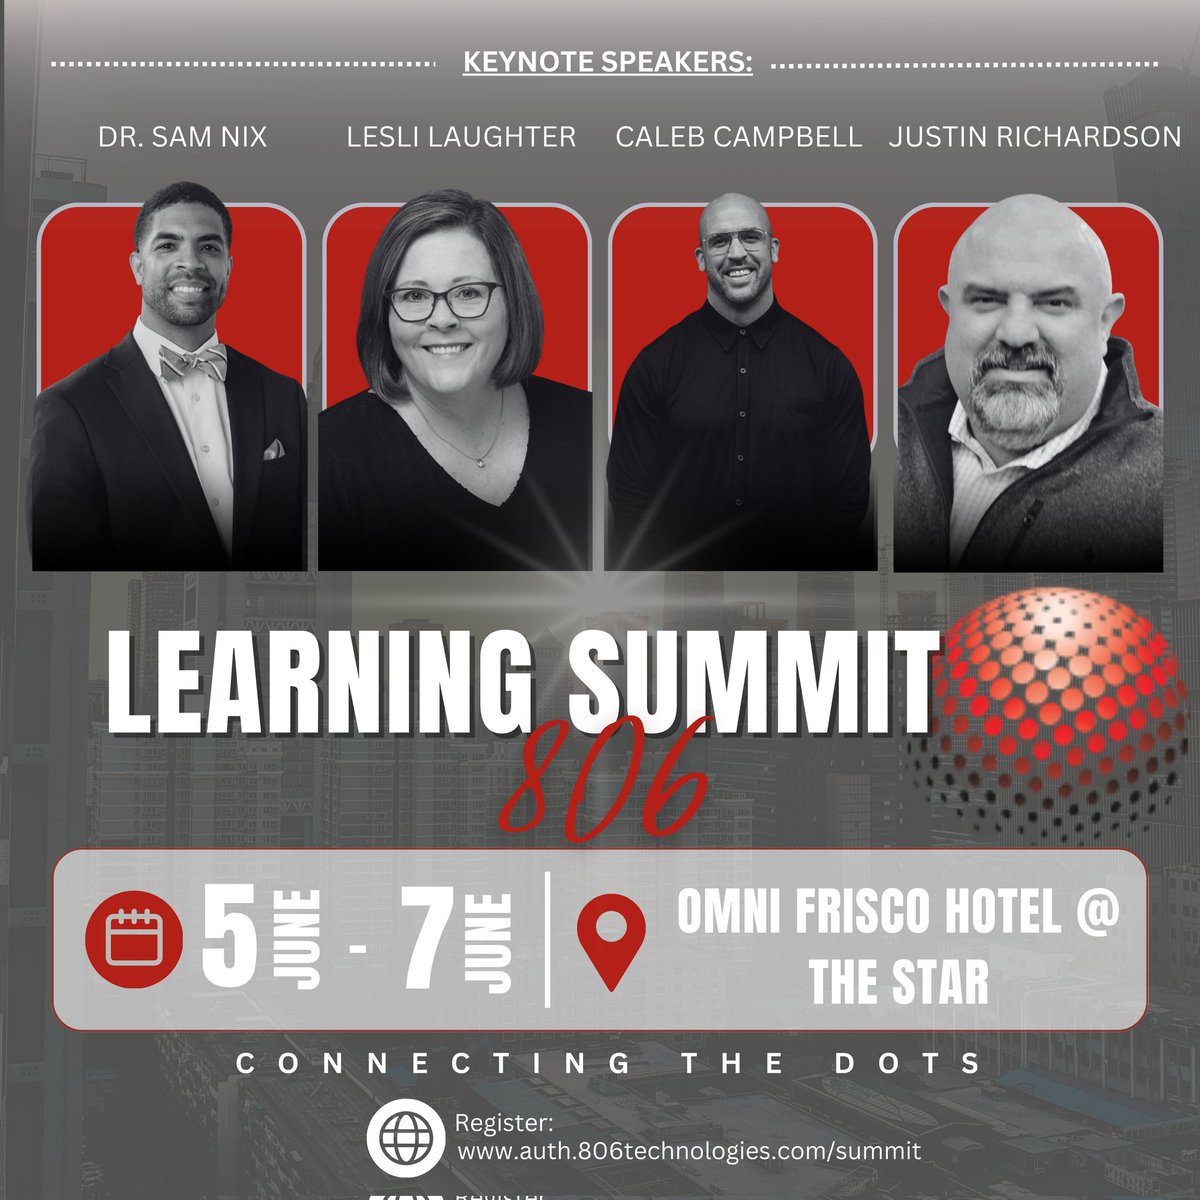 Learn about the #806LearningSummit. Research it & register here: lnkd.in/gqu_7Jzb